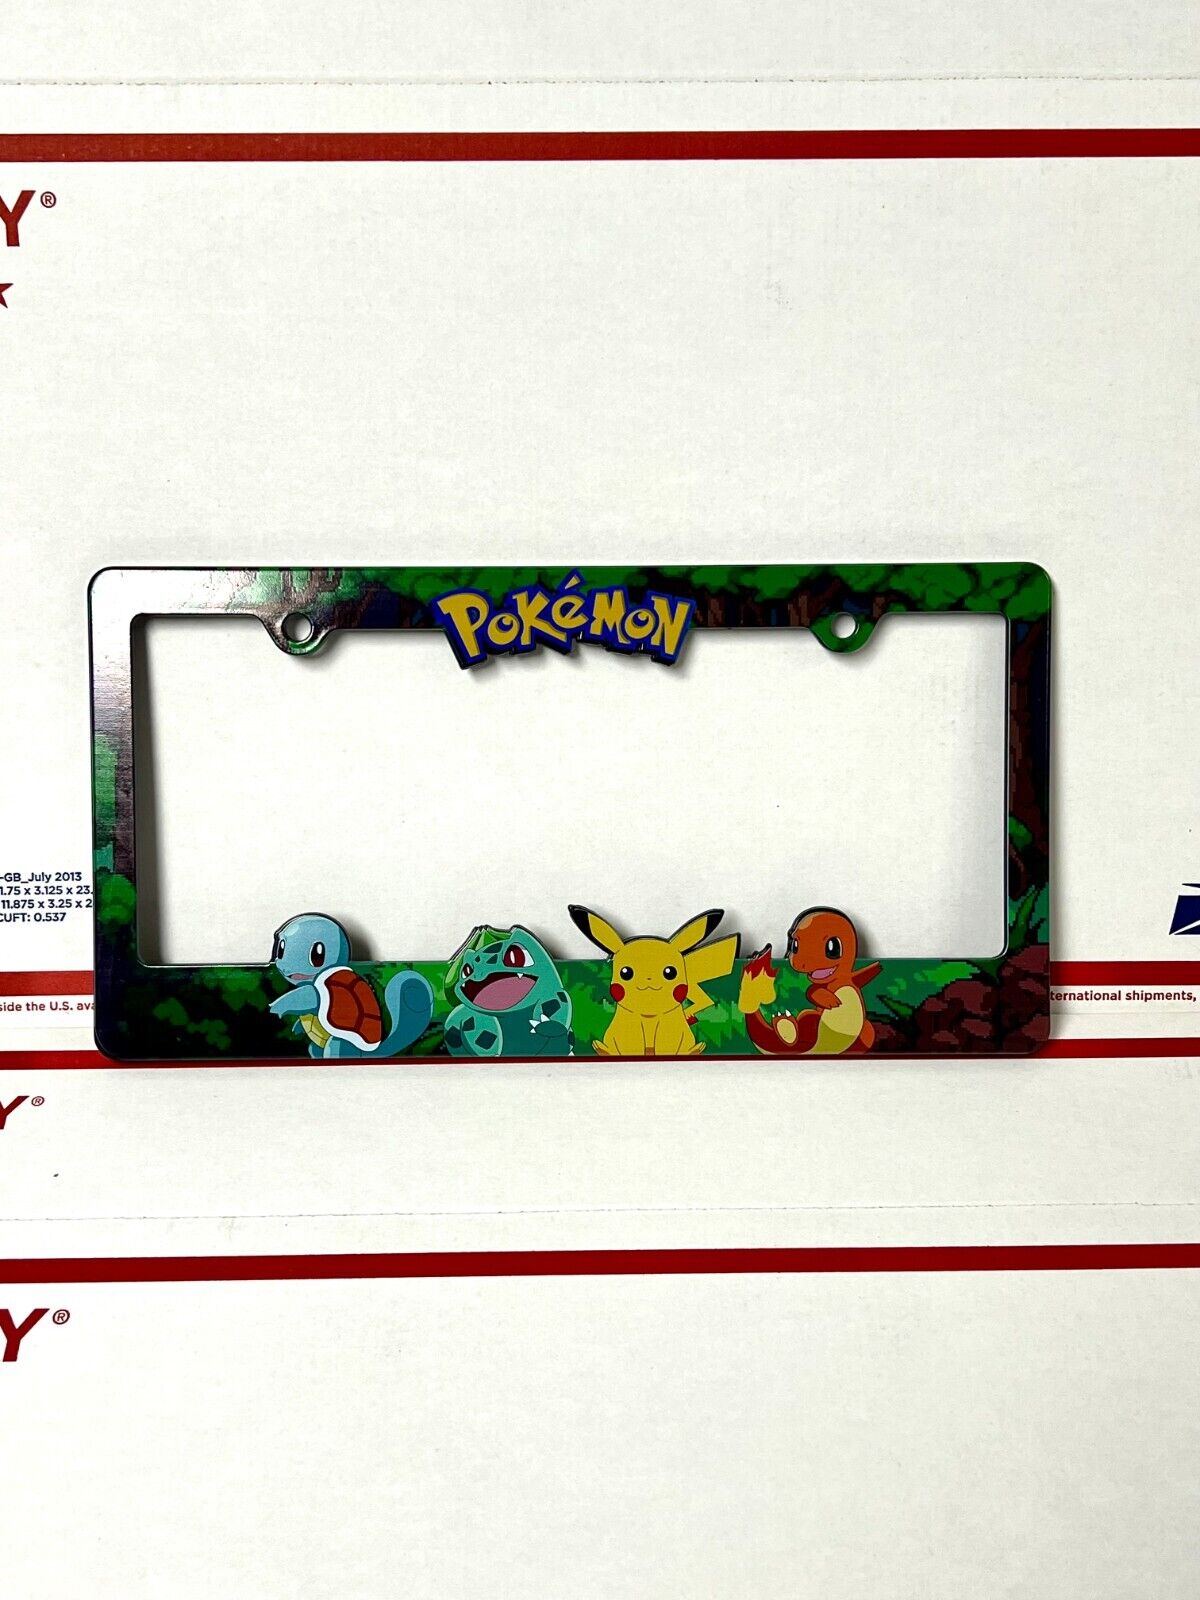 Pokemon License Plate Frame with Pikachu, Charmander, Squirtle, and Bulbasaur